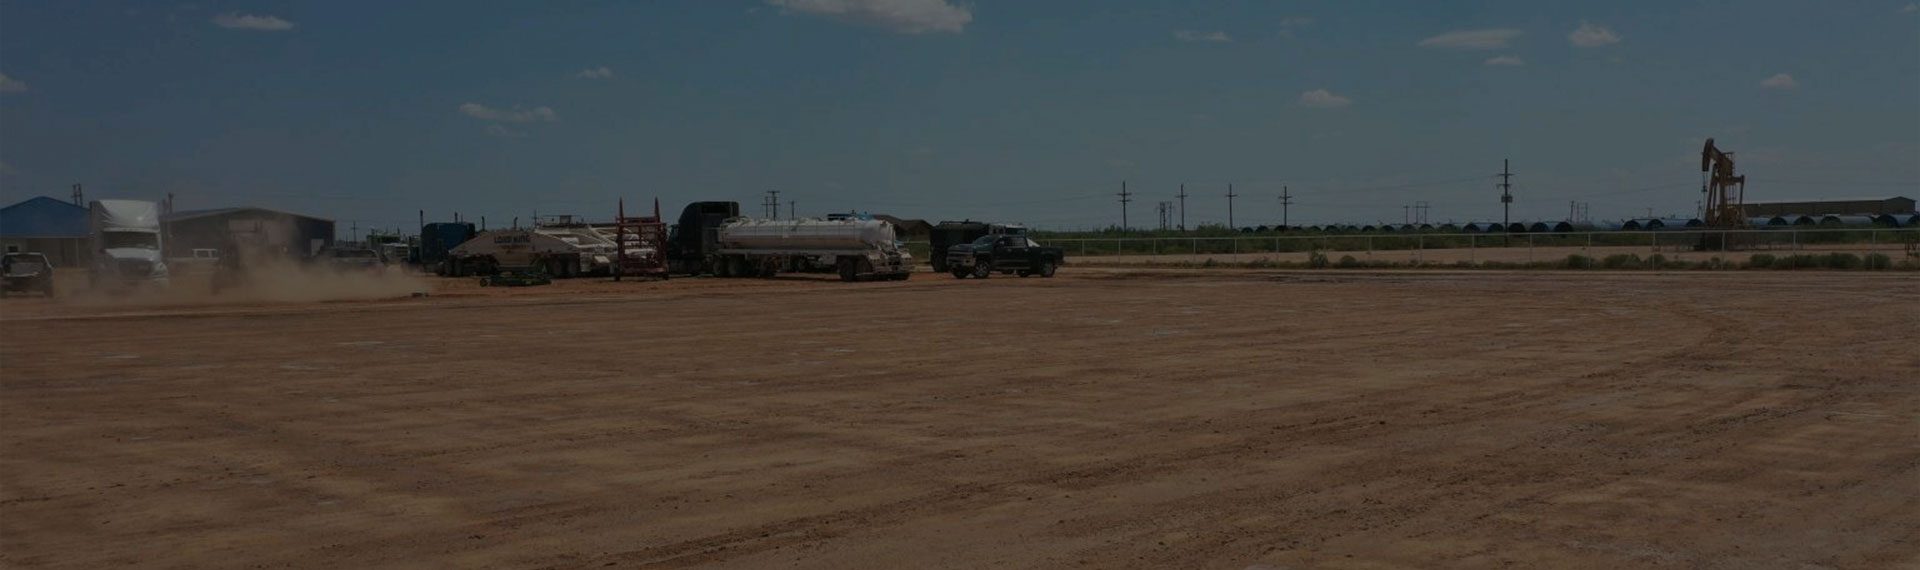 Large dirt field with lots of 18 wheelers in the distance.